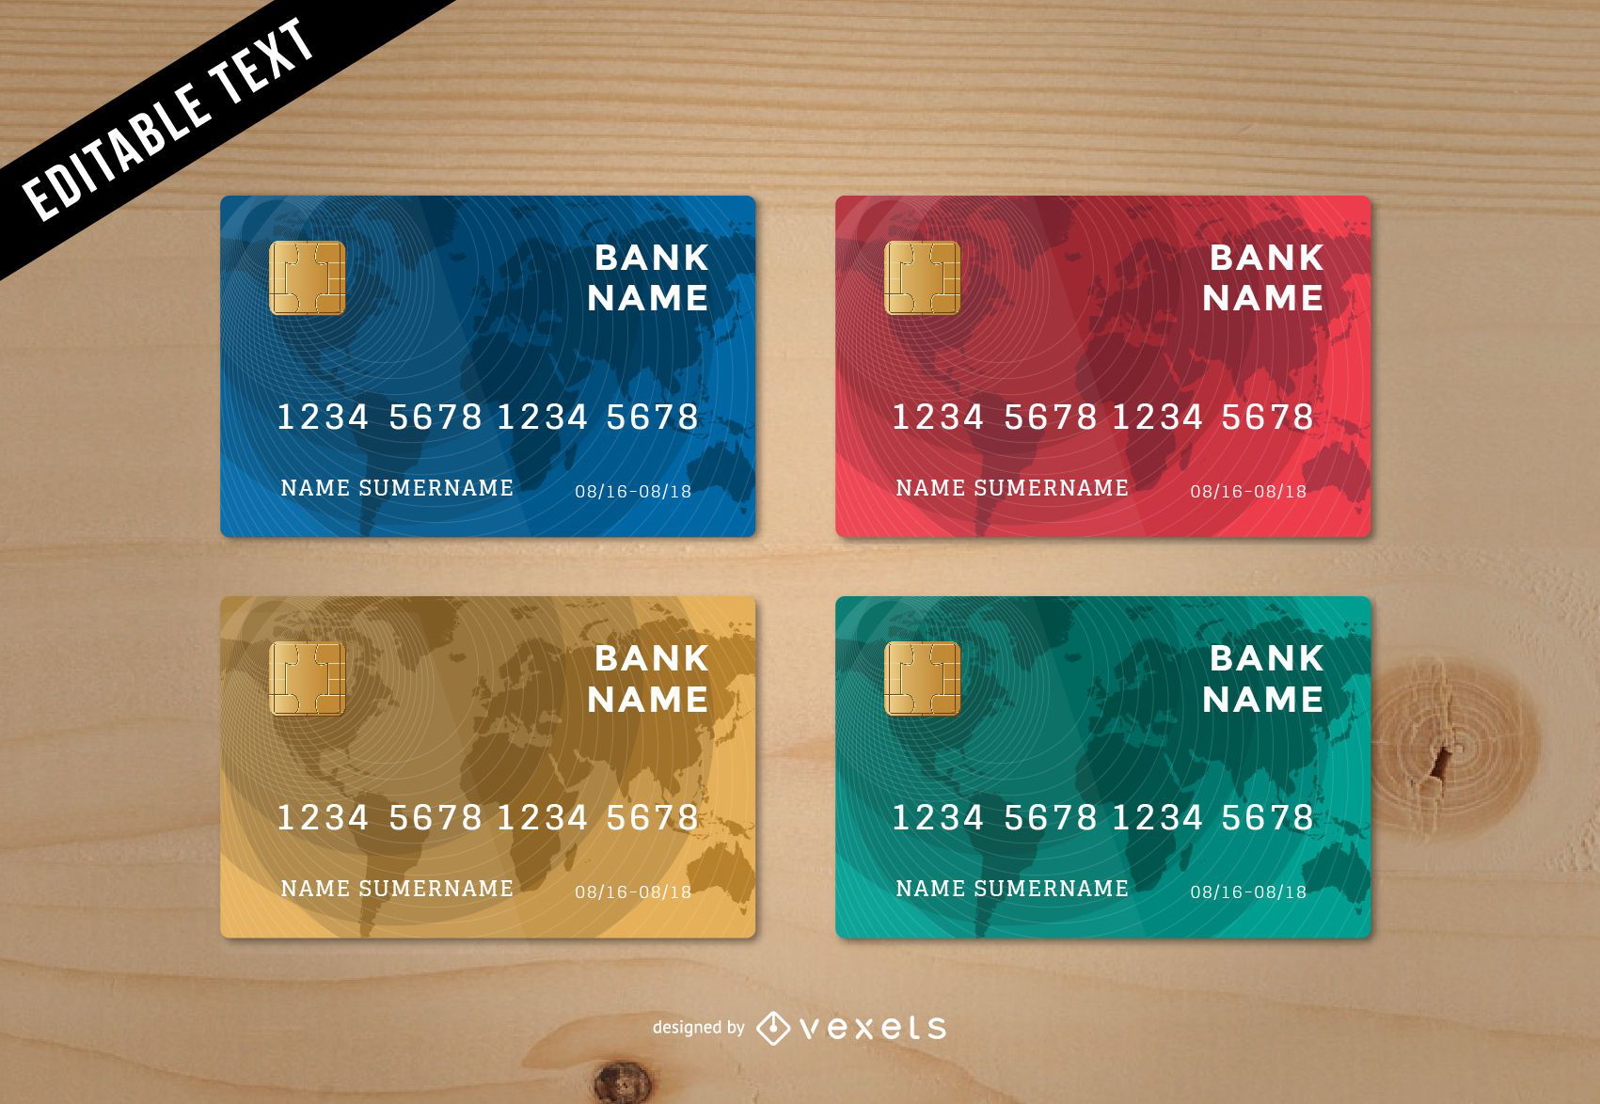 Stunning Credit Card Template